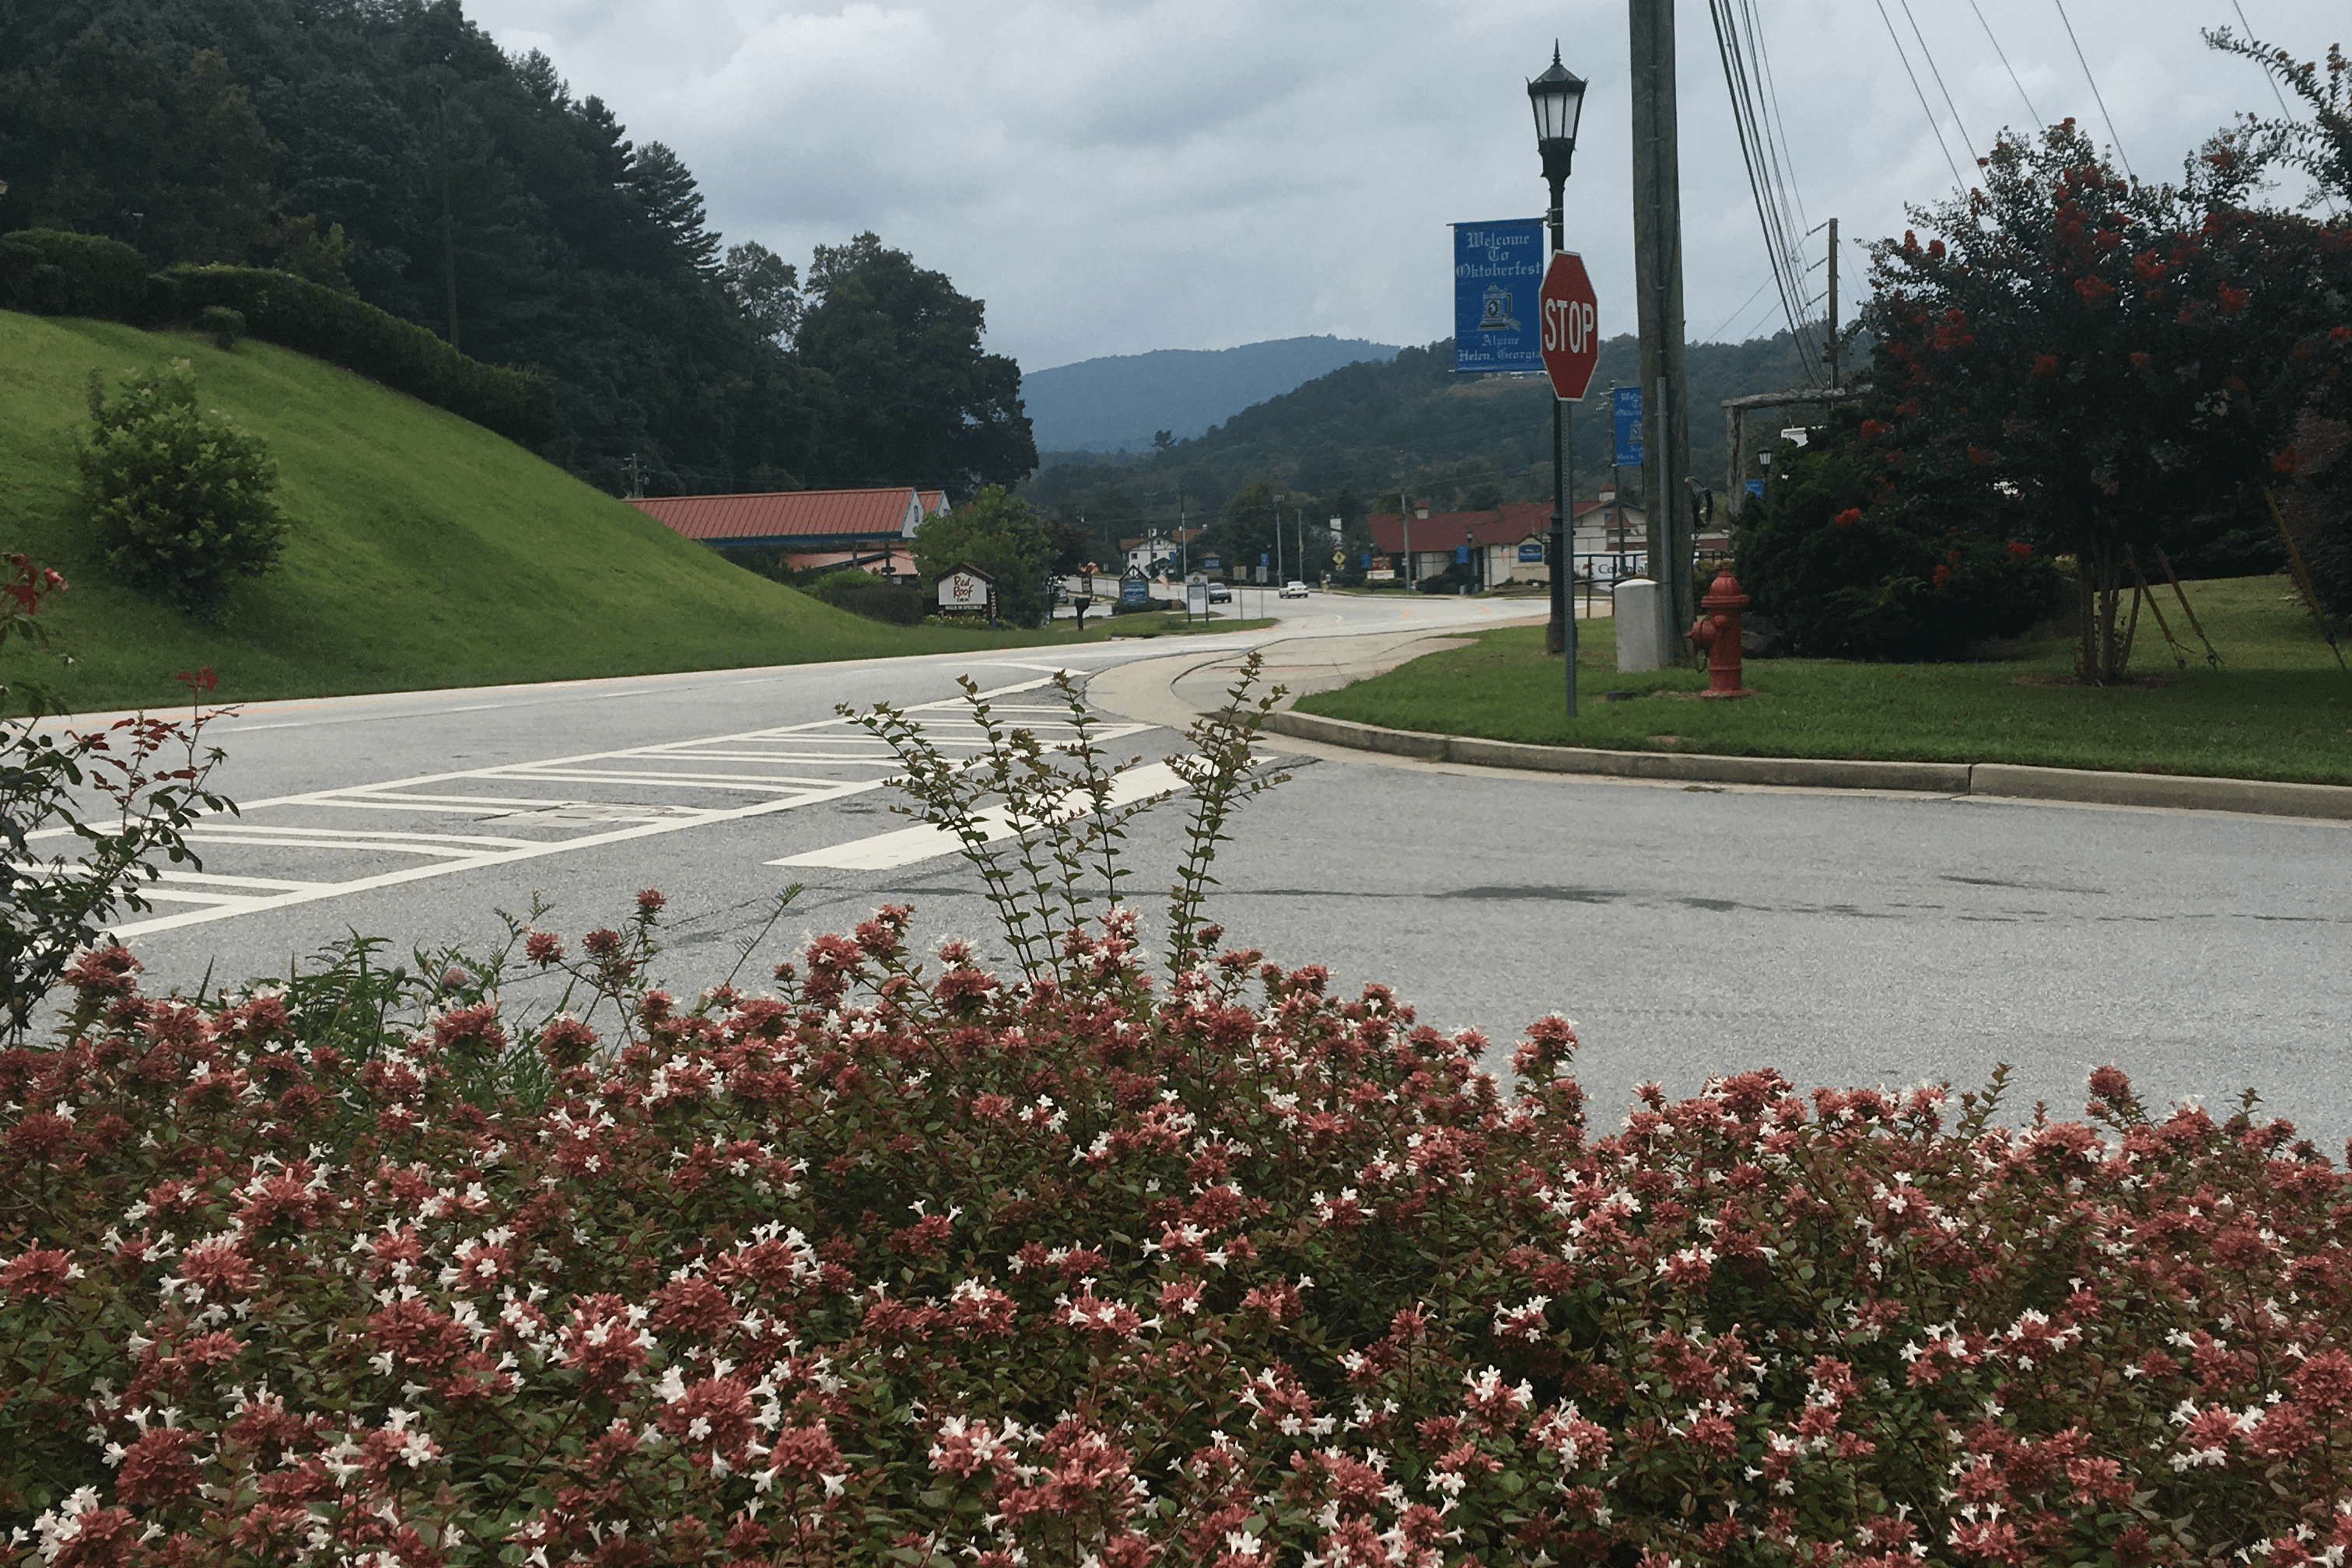 View of road into mountain town